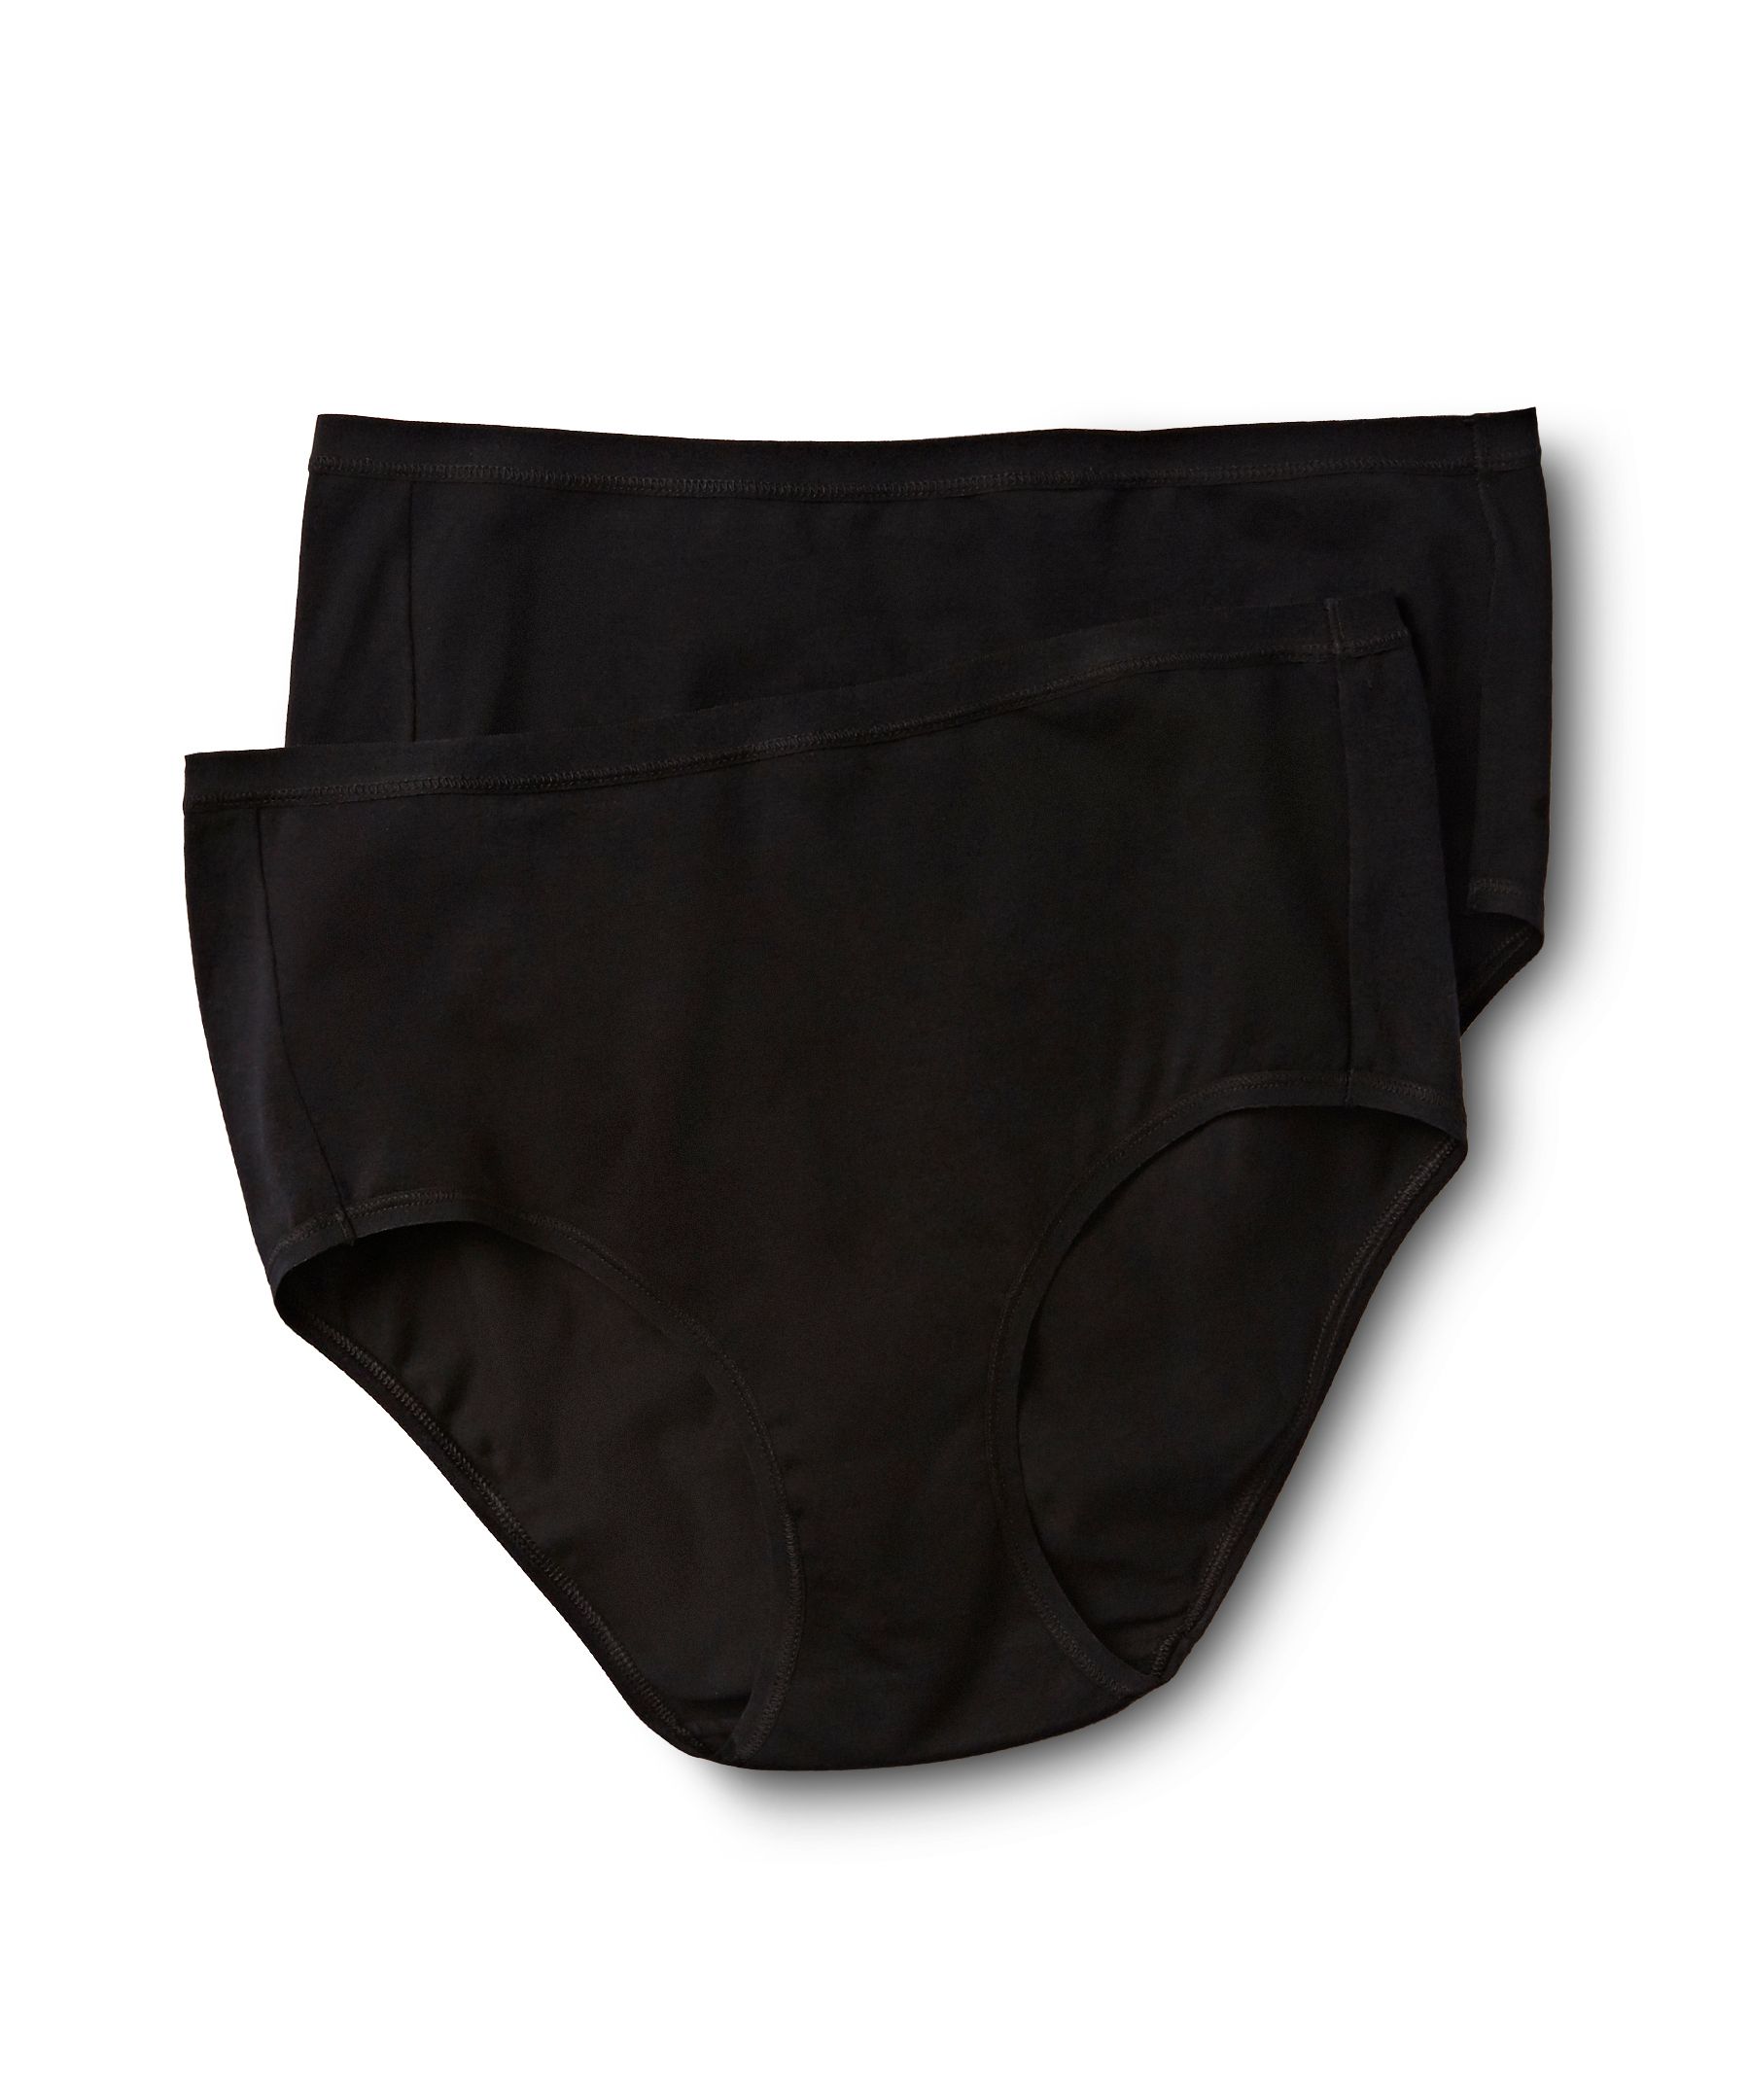 Buy Marks & Spencer Womens Cotton Blend Pack of 3 Underpants at